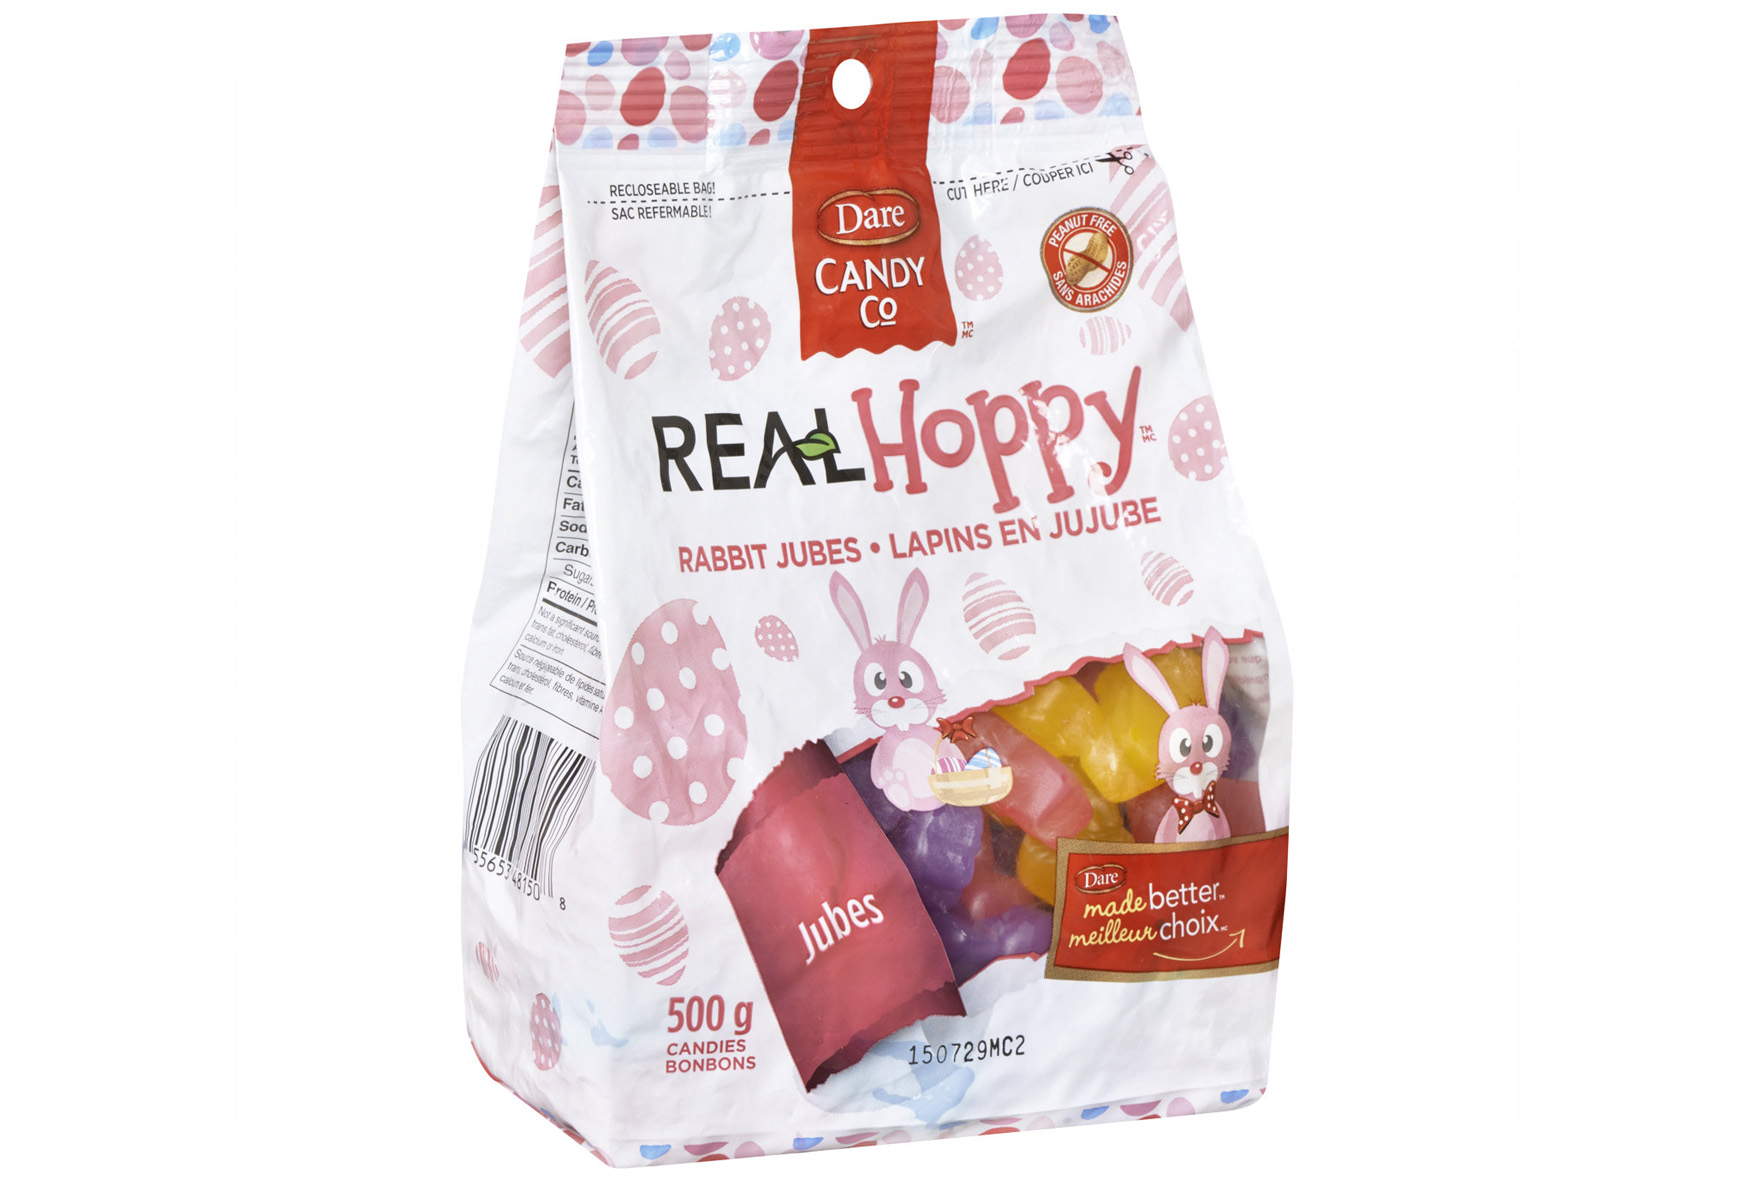 18-real-hoppy-easter-rabbit-jubes-nutrition-facts